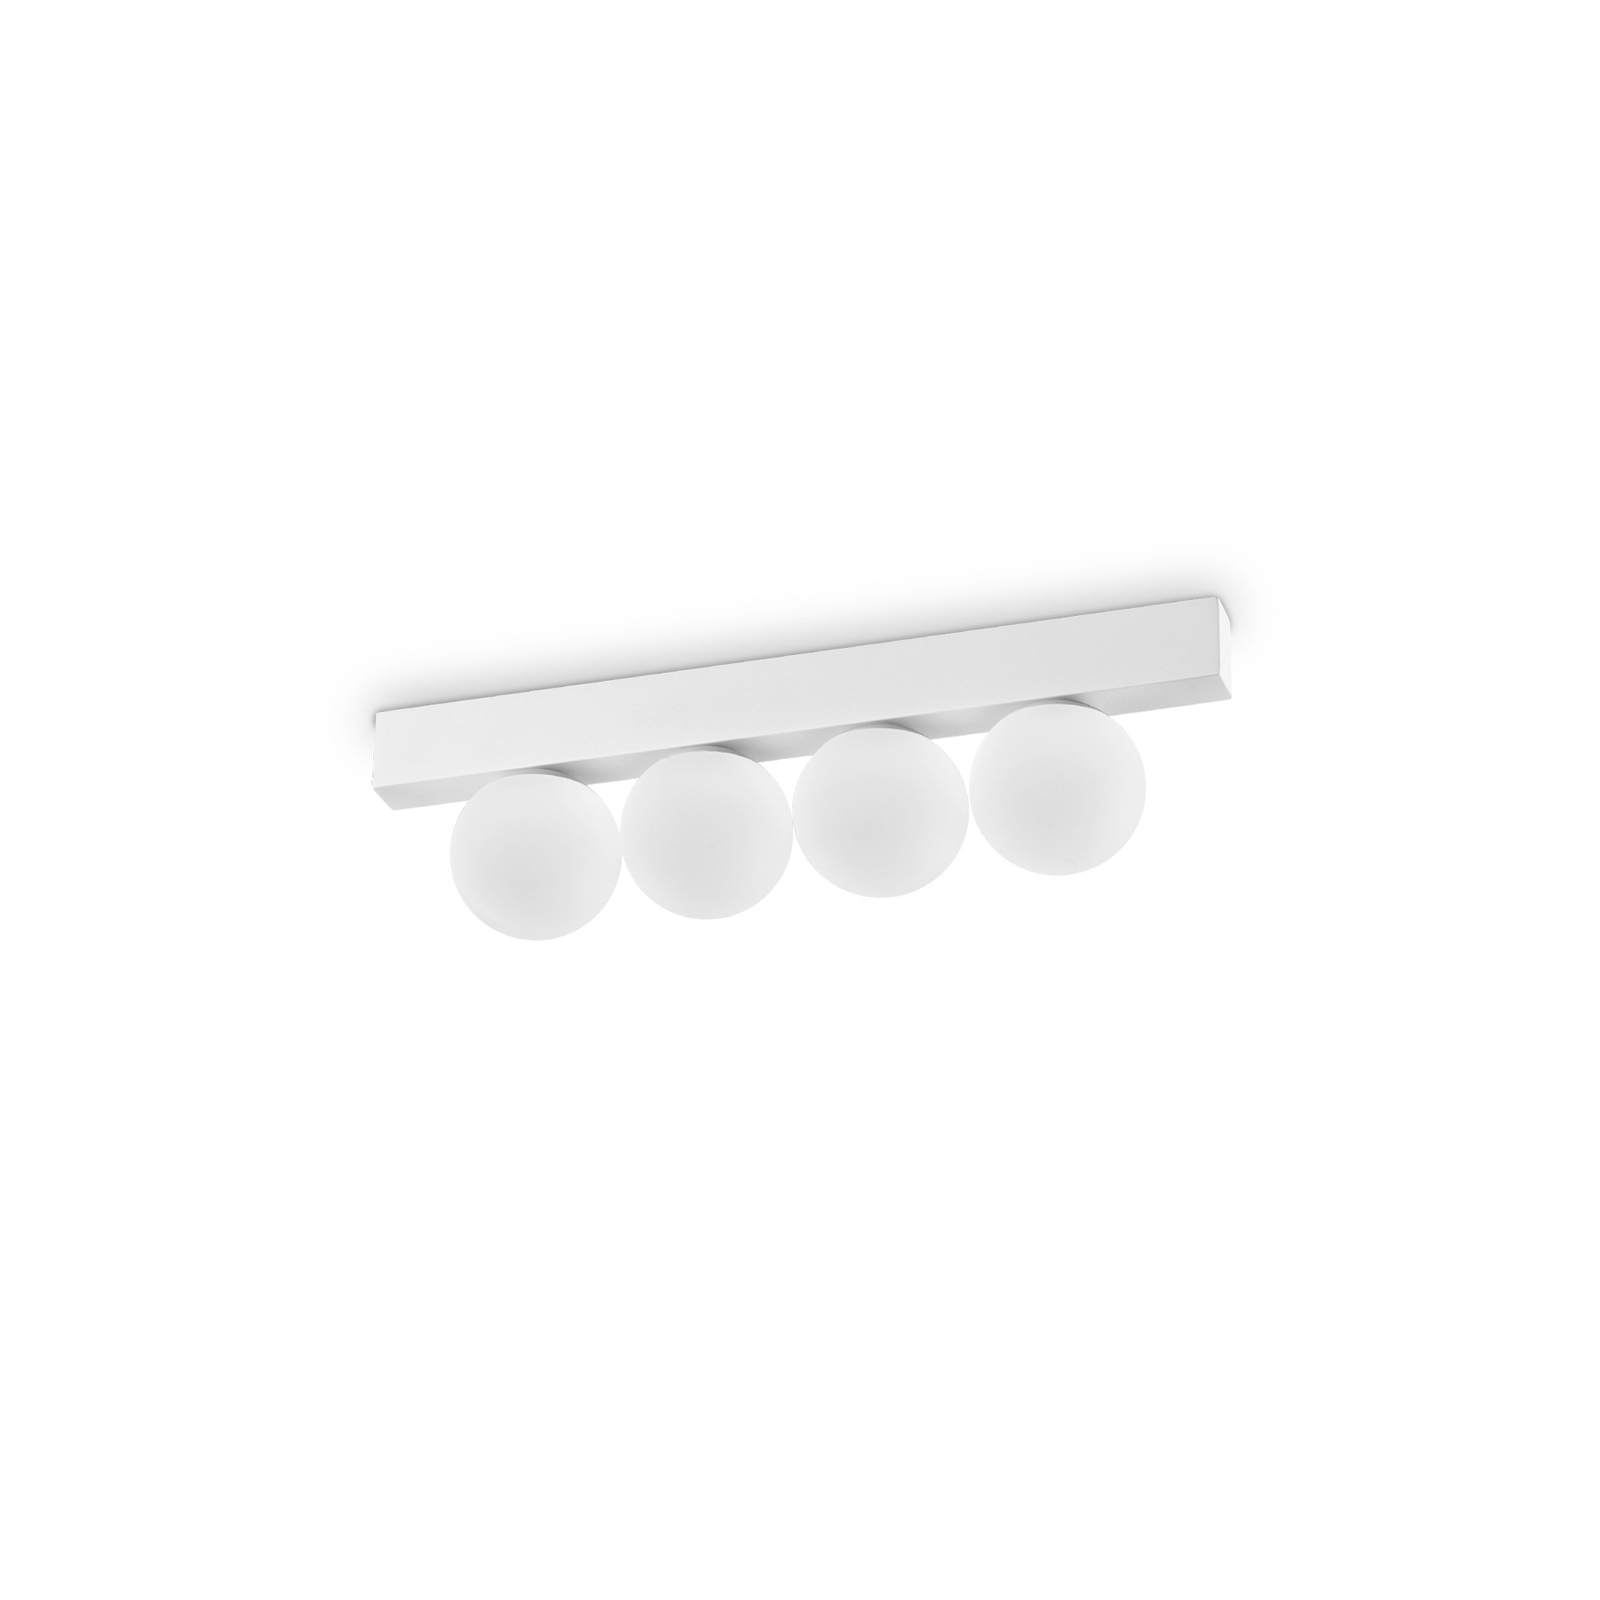 Ideal Lux Plafonnier LED Ping Pong blanc à 4 lampes, verre opalin